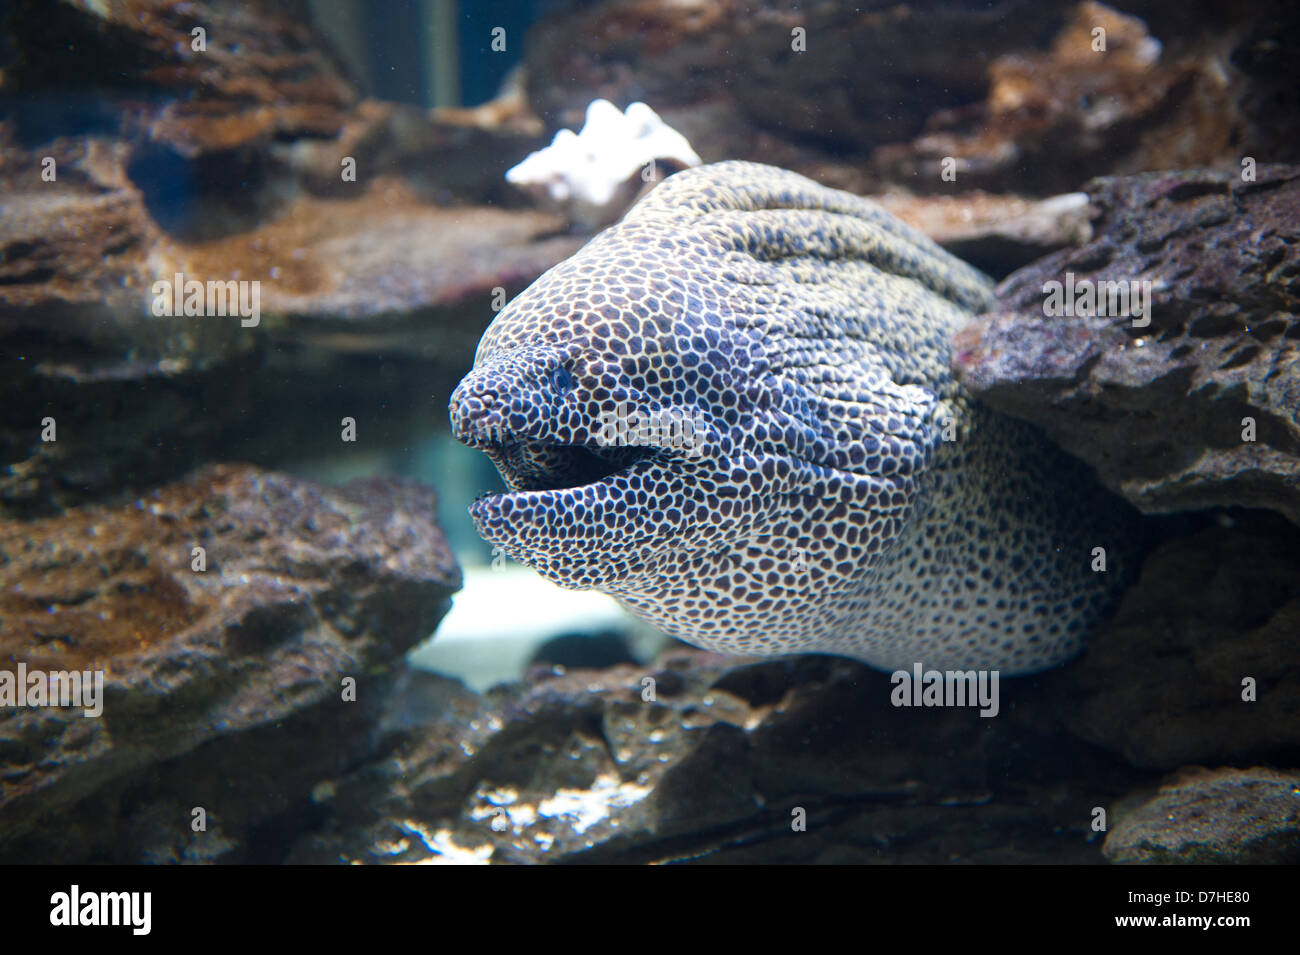 Two Oceans Aquarium, Victoria & Alfred Waterfront, Cape Town, South Africa Stock Photo